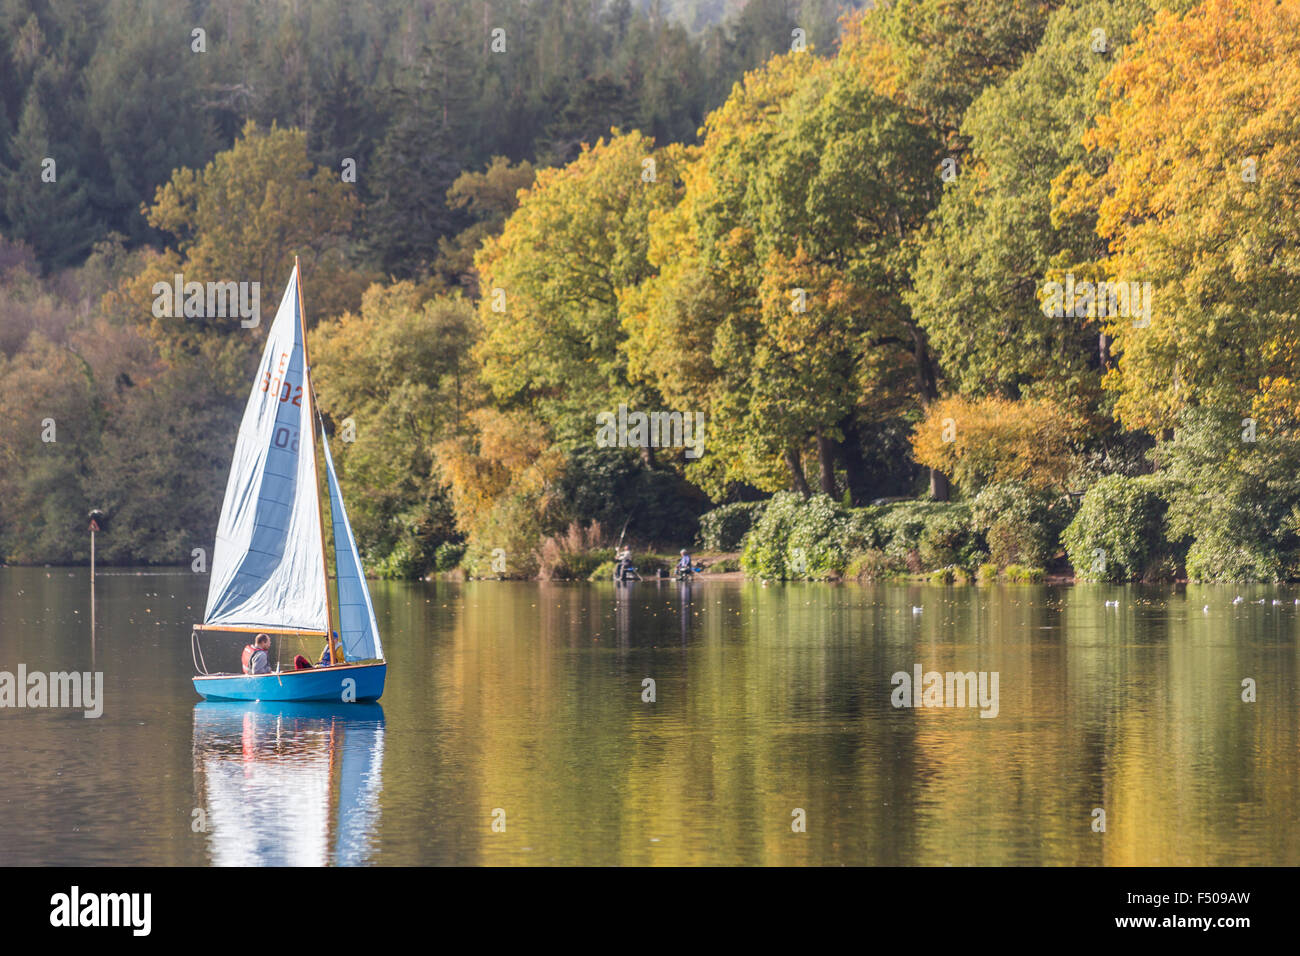 Crockerton, Wiltshire, UK. 25th Oct, 2015. A glorious day of autumn sunshine highlights the changing colours of the trees alongside the waters edge. Shearwater lake is hidden within Longleat Forest and is part of the safari park estate. It is popular with visitors who enjoy walking the tree lined lanes, fishing and boating on the lake. Credit:  Wayne Farrell/Alamy Live News Stock Photo